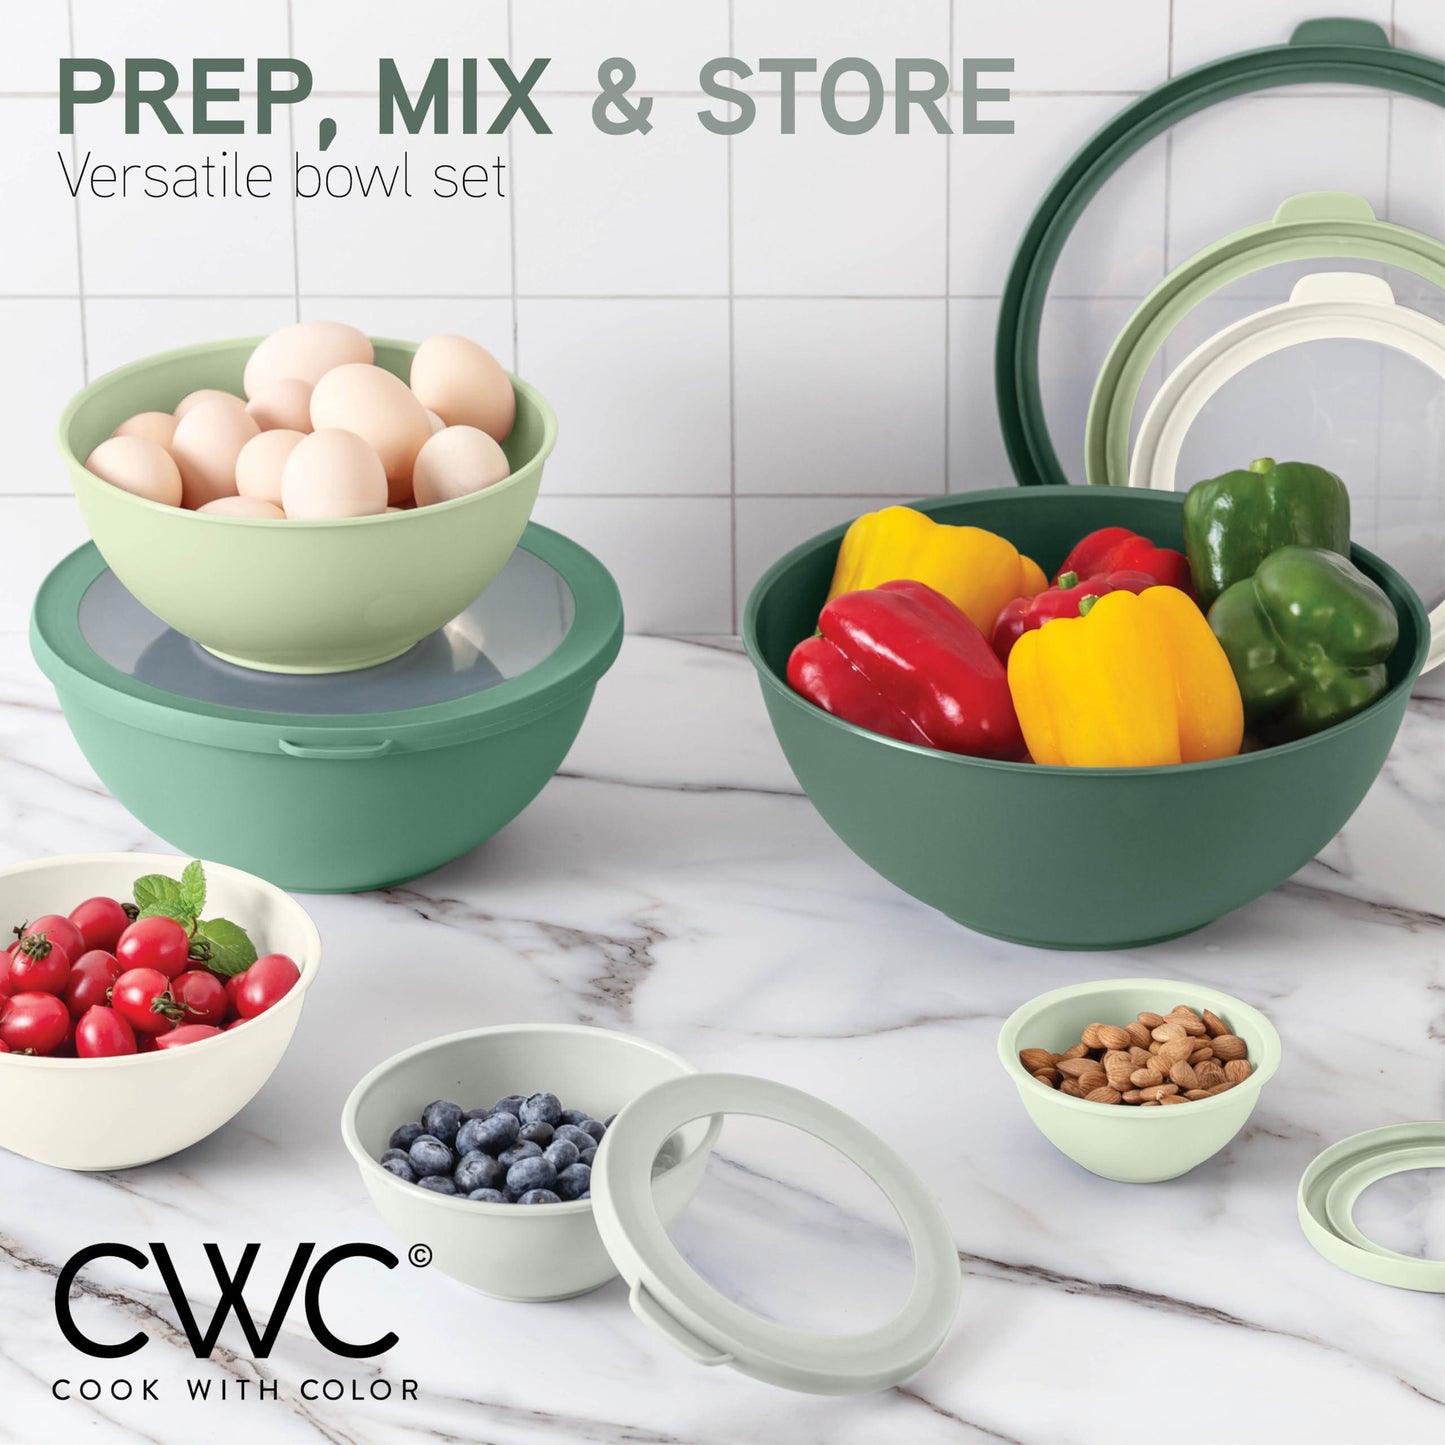 COOK WITH COLOR Mixing Bowls with TPR Lids - 12 Piece Plastic Nesting Bowls Set includes 6 Prep Bowls and 6 Lids - Microwave Safe (Sage) - CookCave